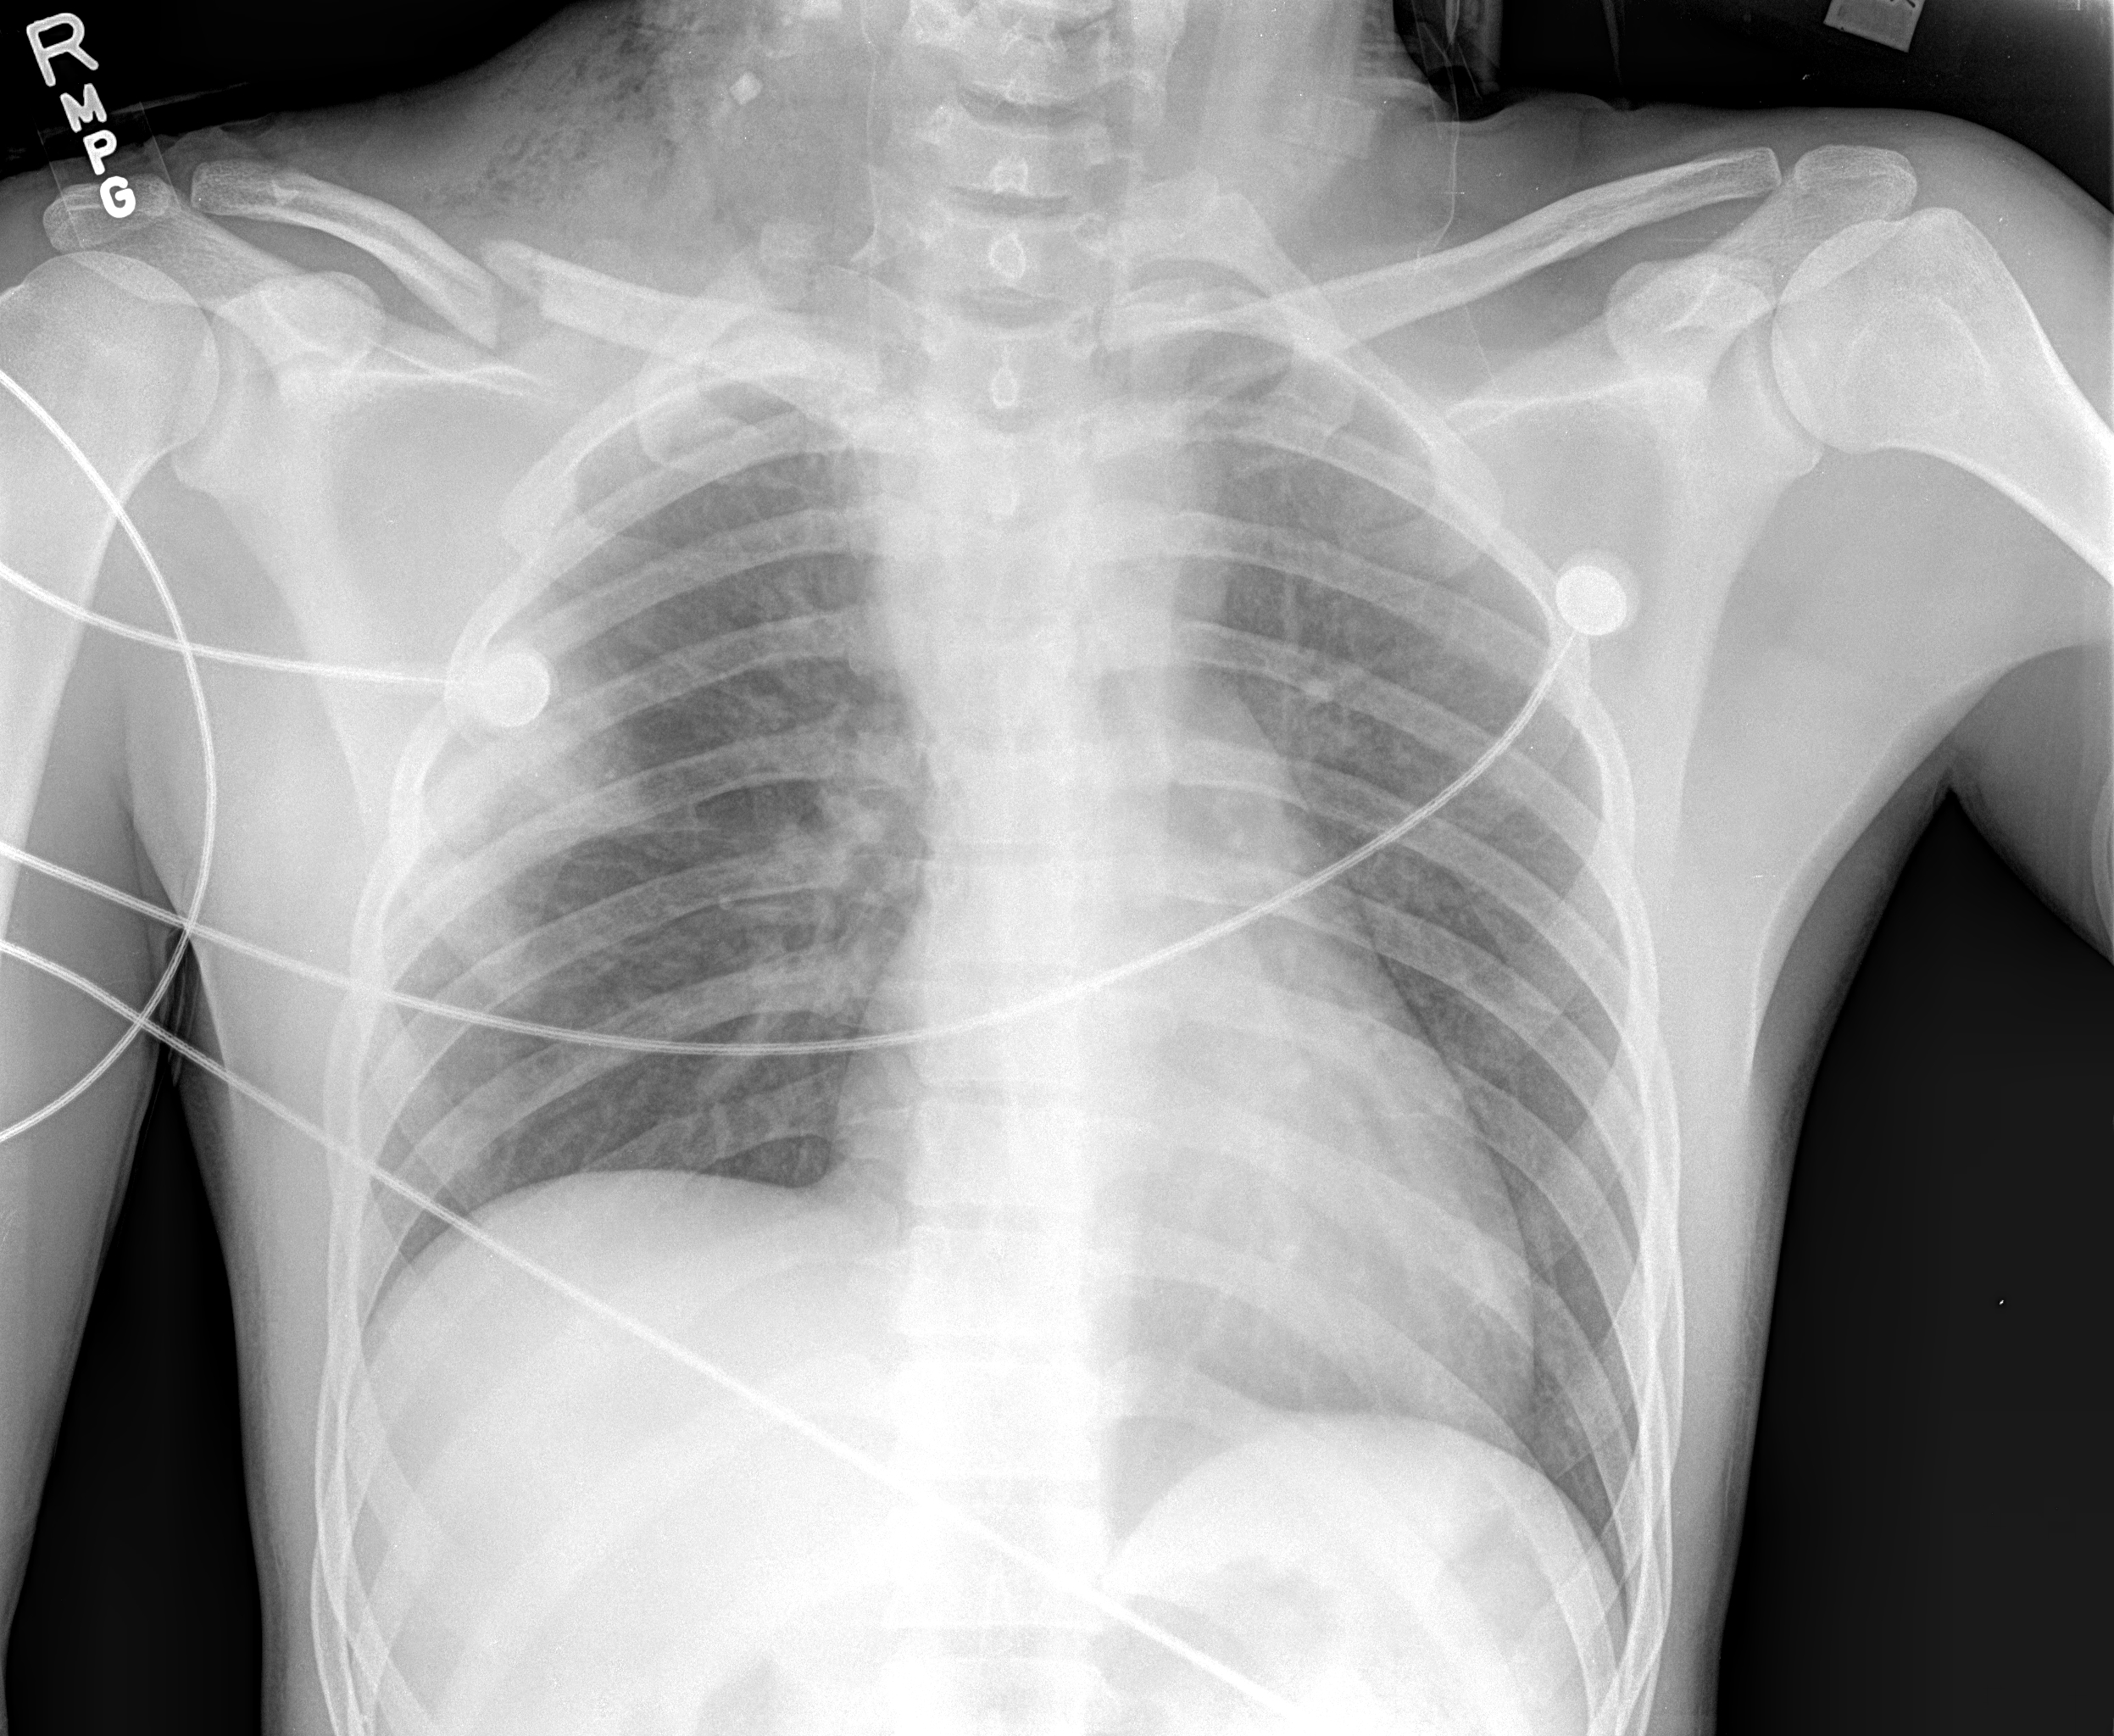 Chest x-ray of a patient who sustained traumatic root avulsion brachial plexus injury. Note the elevated right hemidiaphragm indicating associated phrenic nerve injury. The patient also sustained fractures to the right midshaft clavicle and right 1st and 2nd ribs.